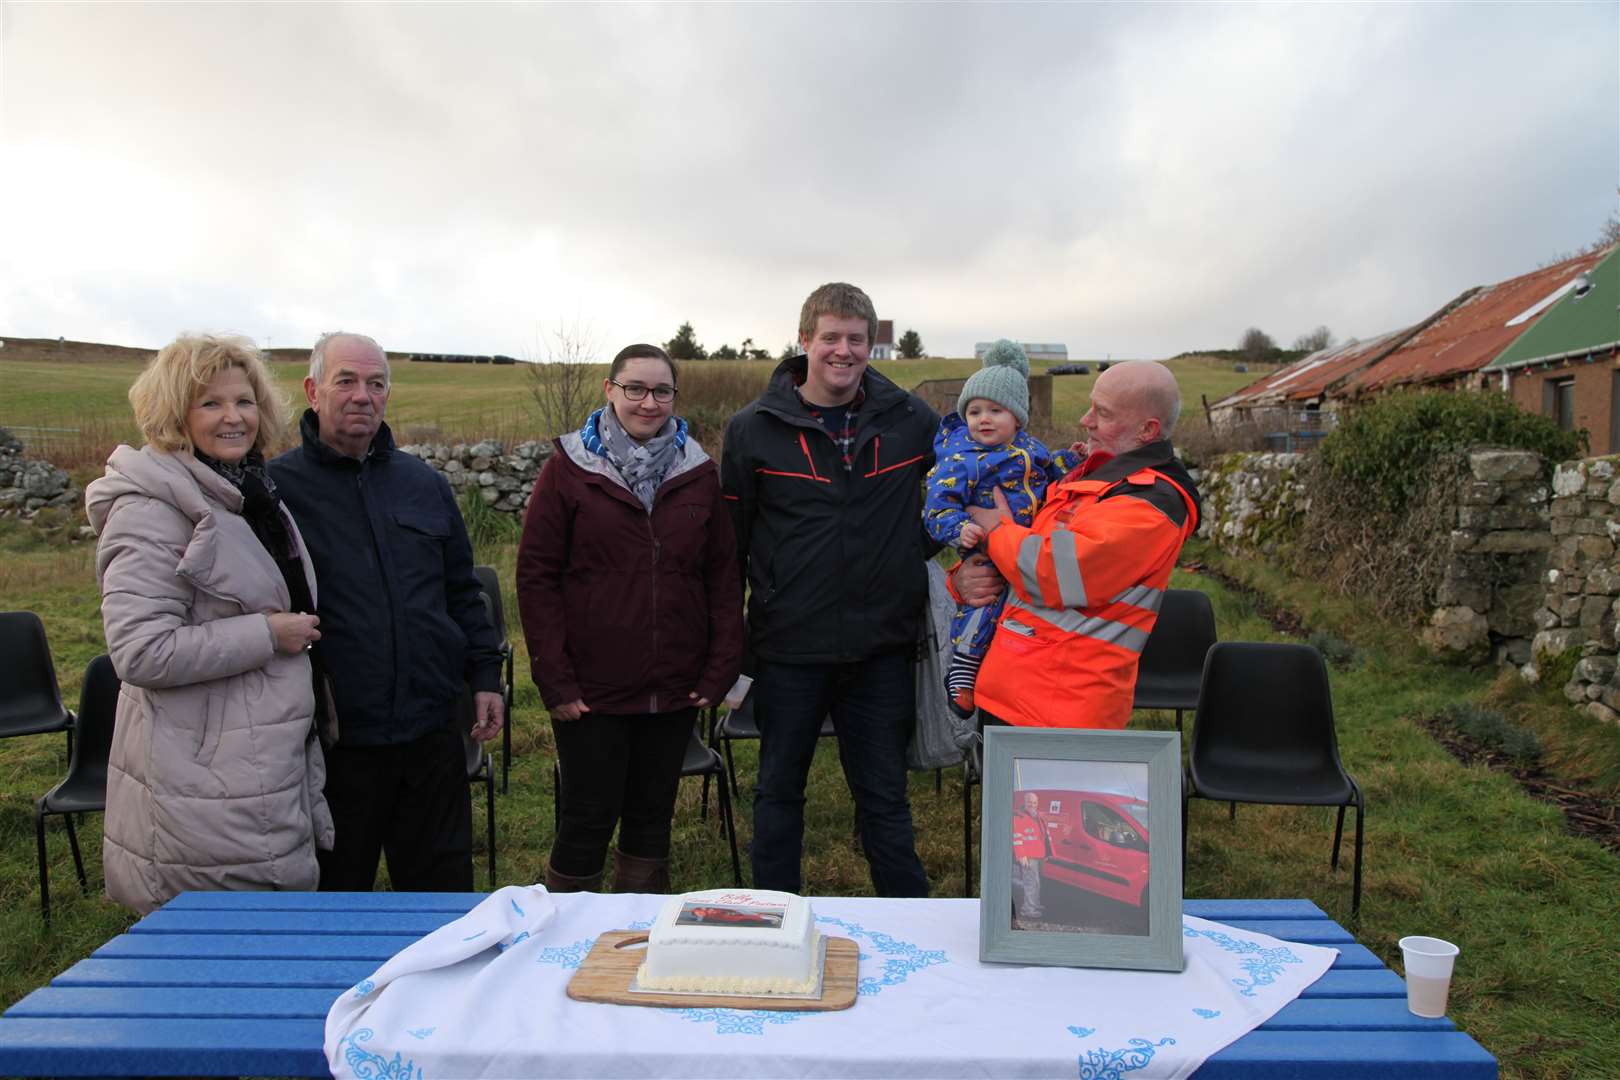 Billy Mackay, above, with his grandson Callum, stands next to his son Murdo Mackay, and Murdo’s partner Laura Gunn. Rosemary Cameron, far left, helped organise the community event, and James Horne, second left, the former postmaster at West End Stores, presented Mr Mackay with the community collection.